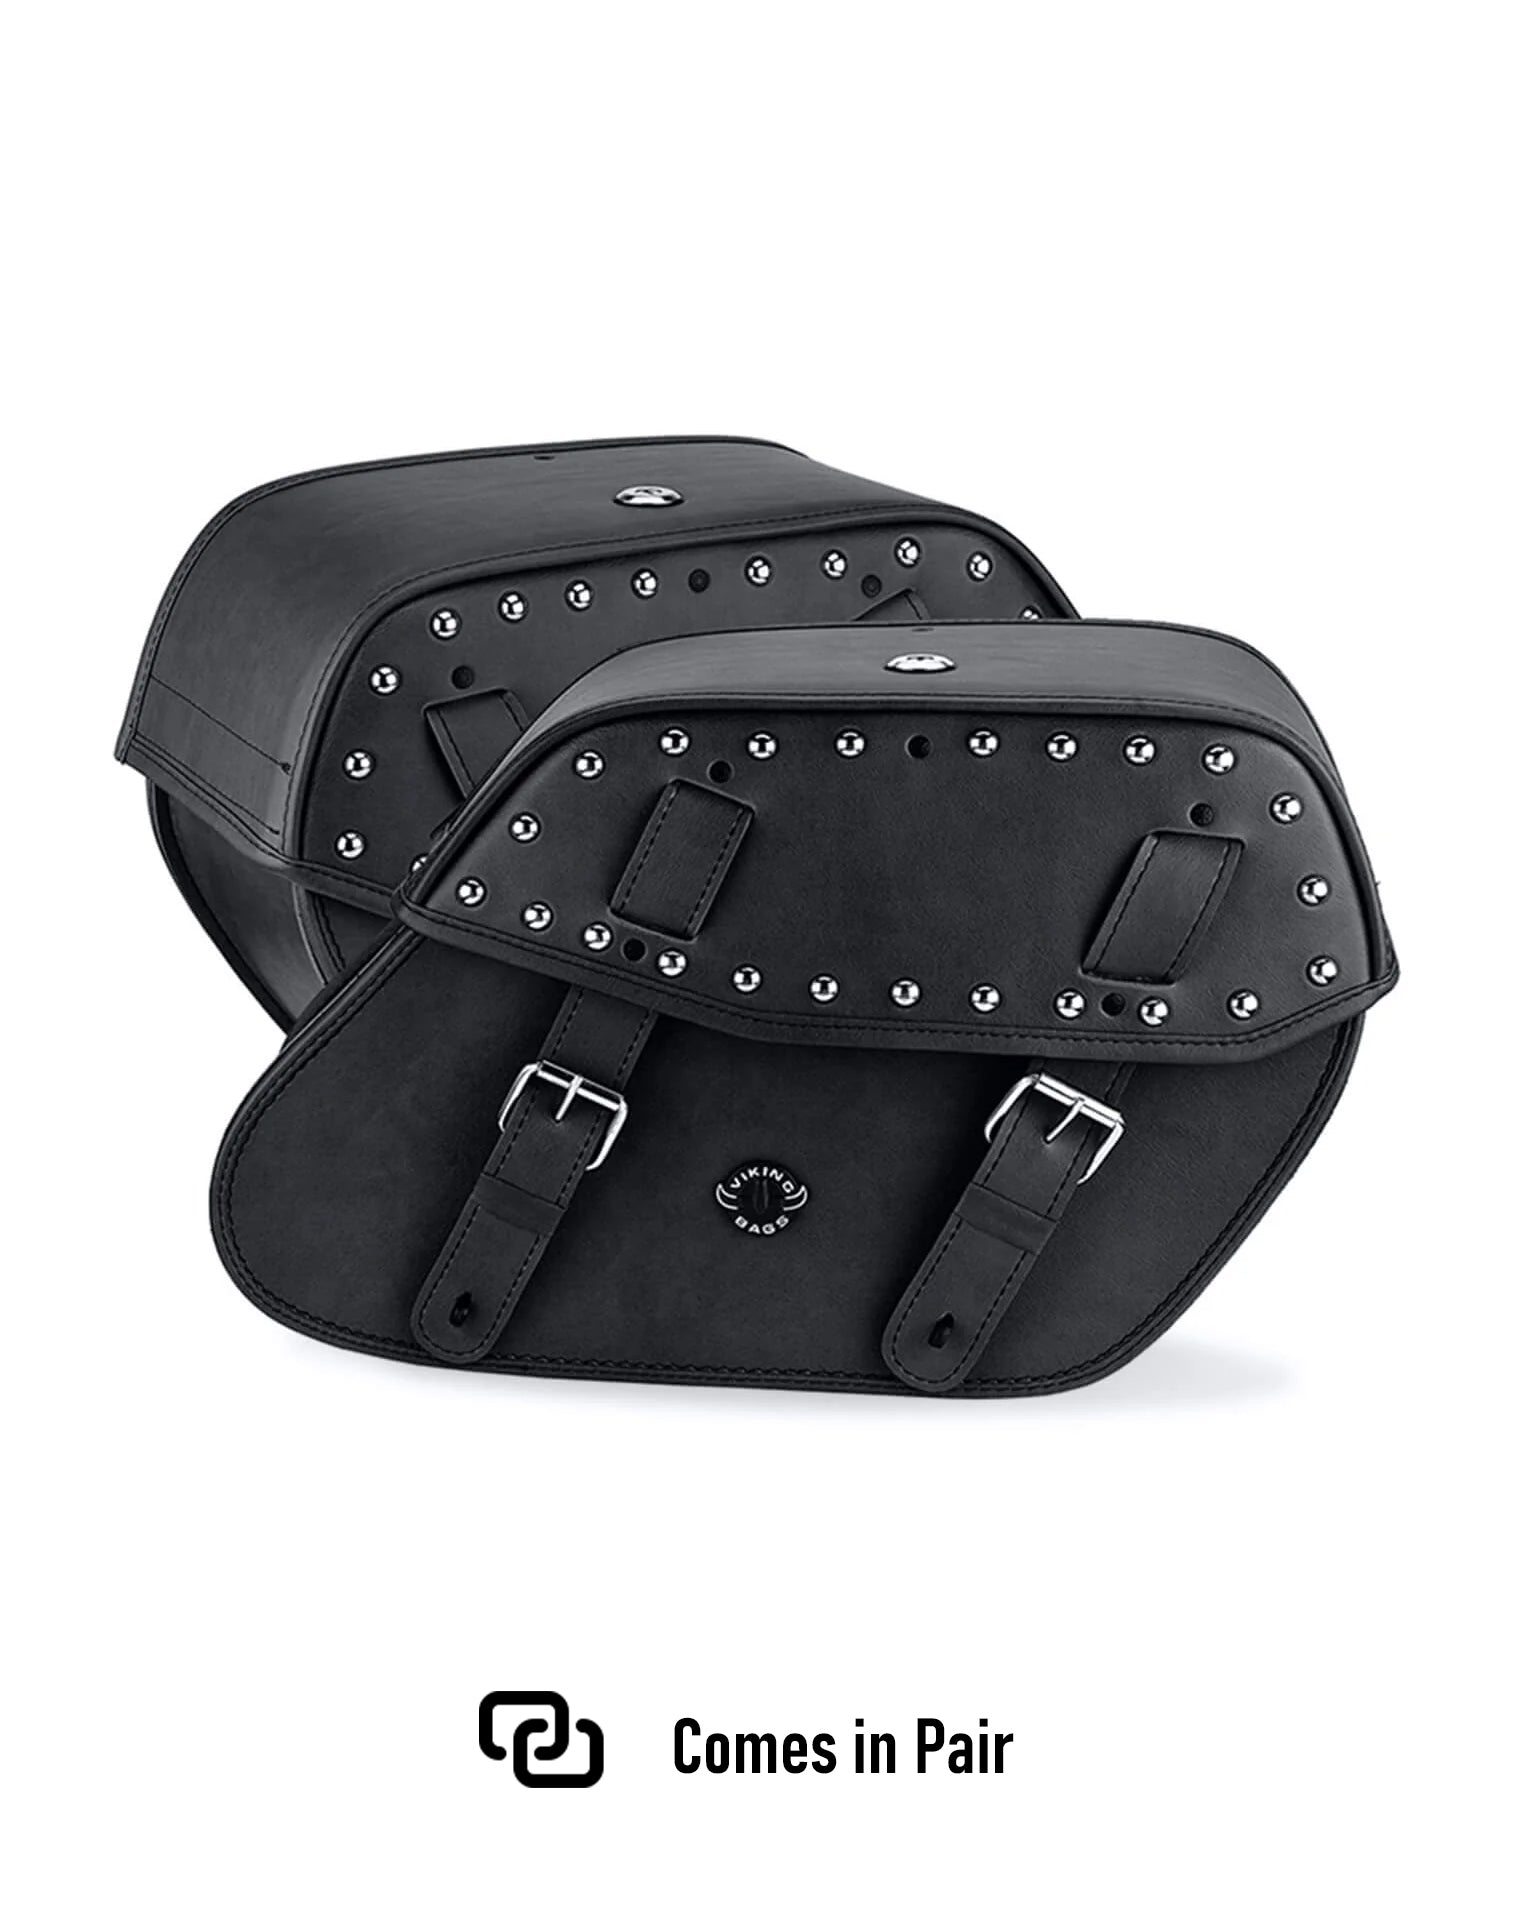 Viking Odin Large Kawasaki Vulcan 800 Classic Studded Leather Motorcycle Saddlebags Weather Resistant Bags Comes in Pair